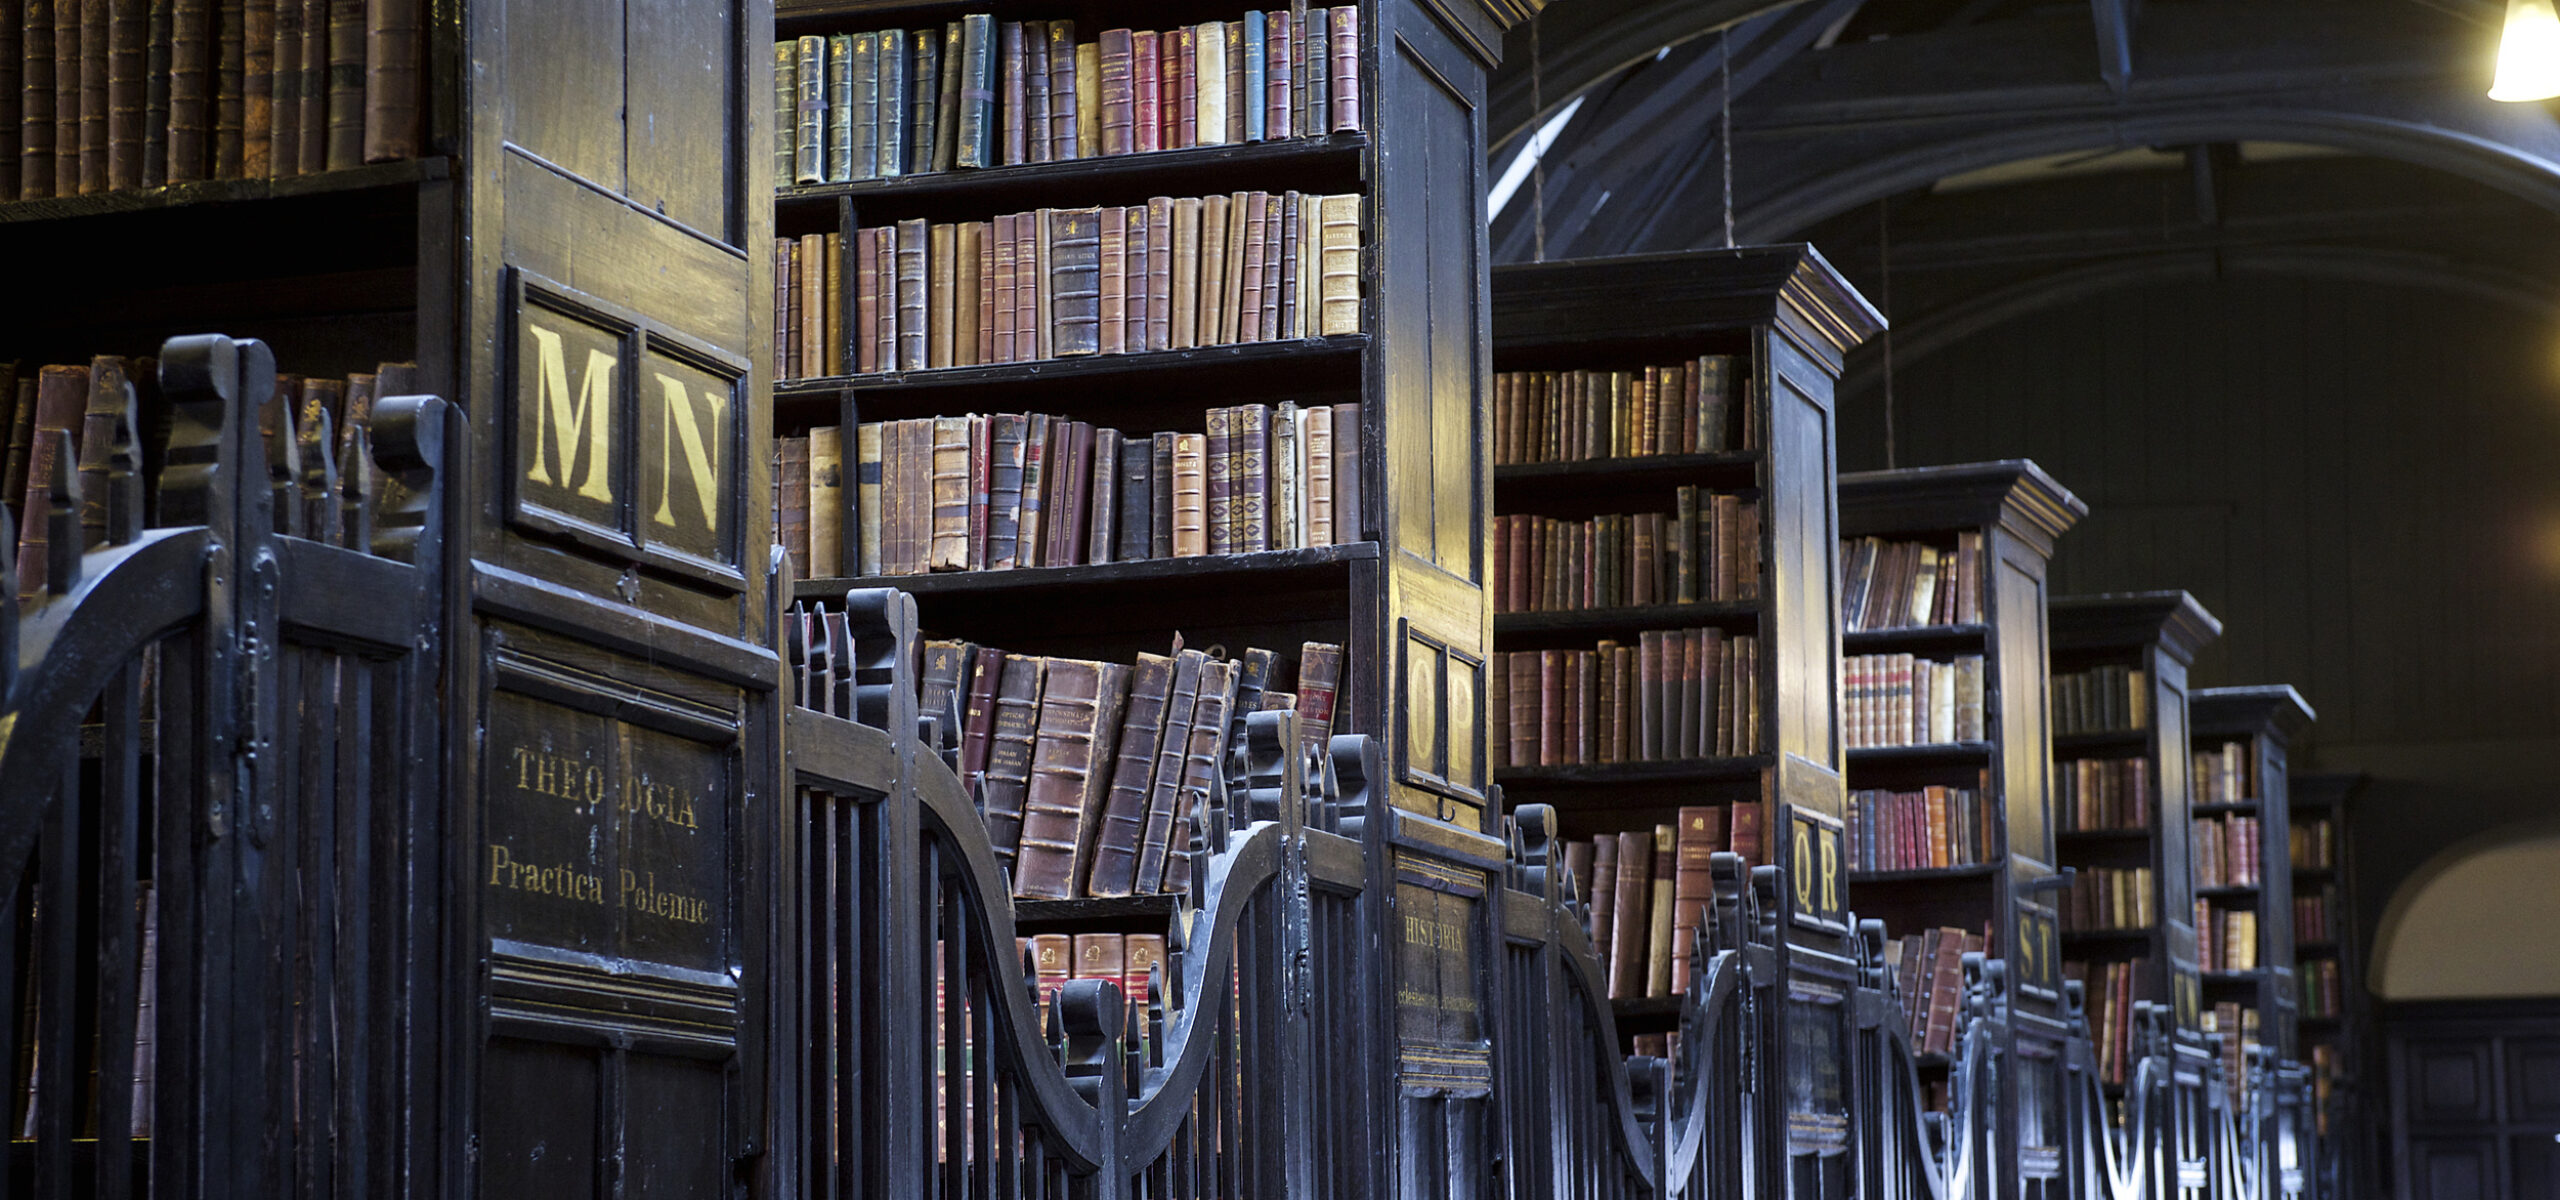 Books in the Chethams Library, Manchester